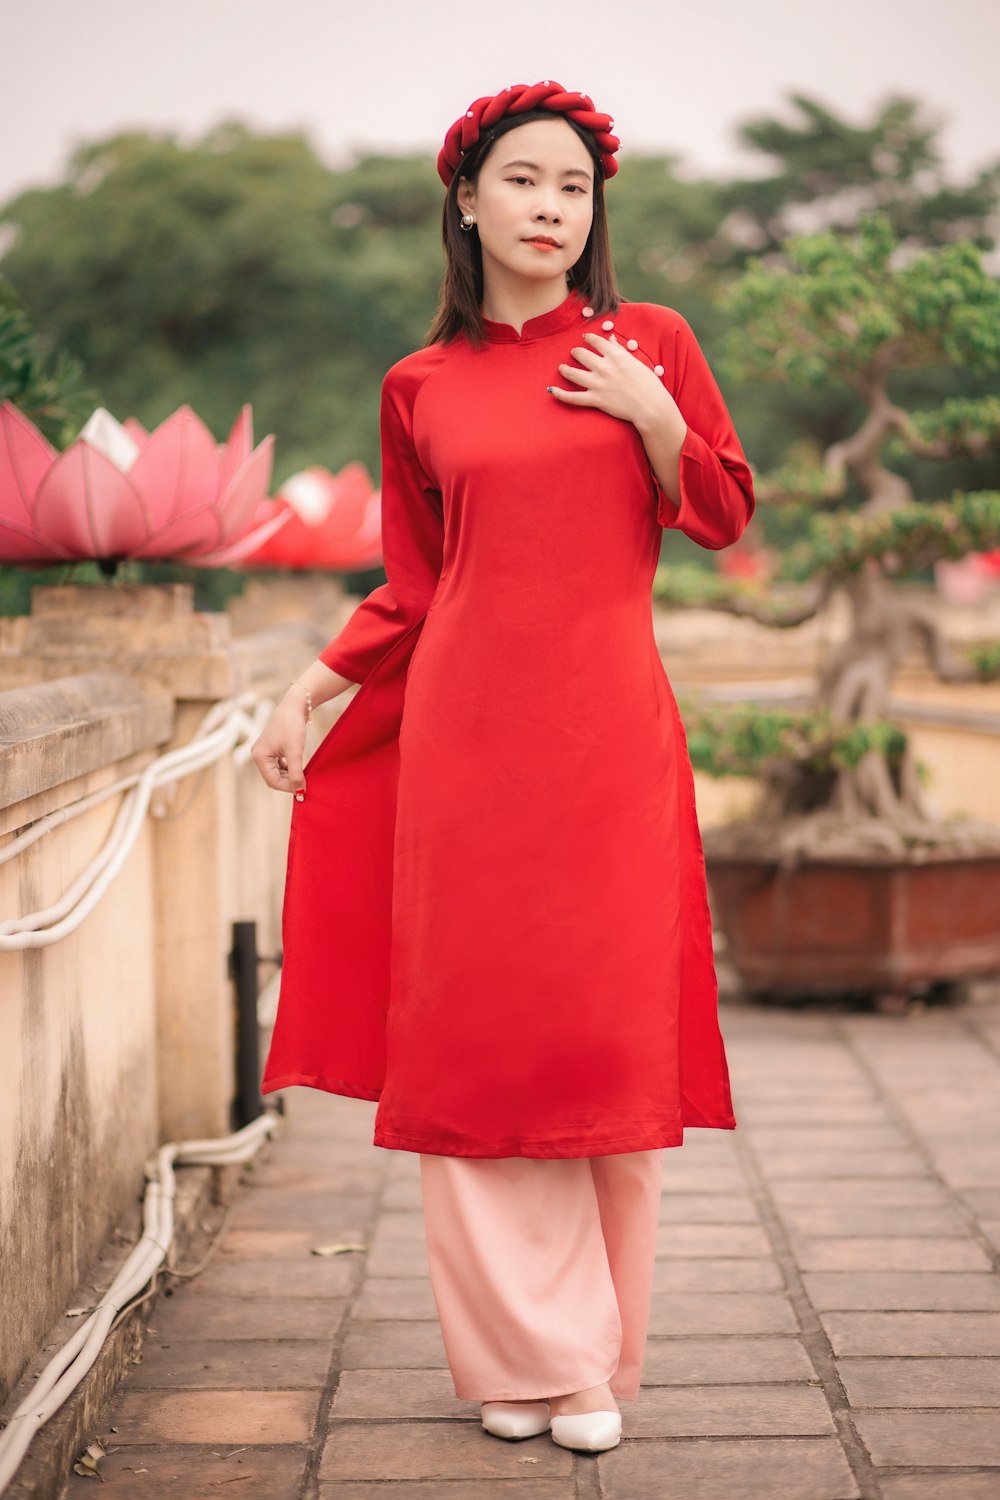 a woman in a red dress standing on a brick walkway